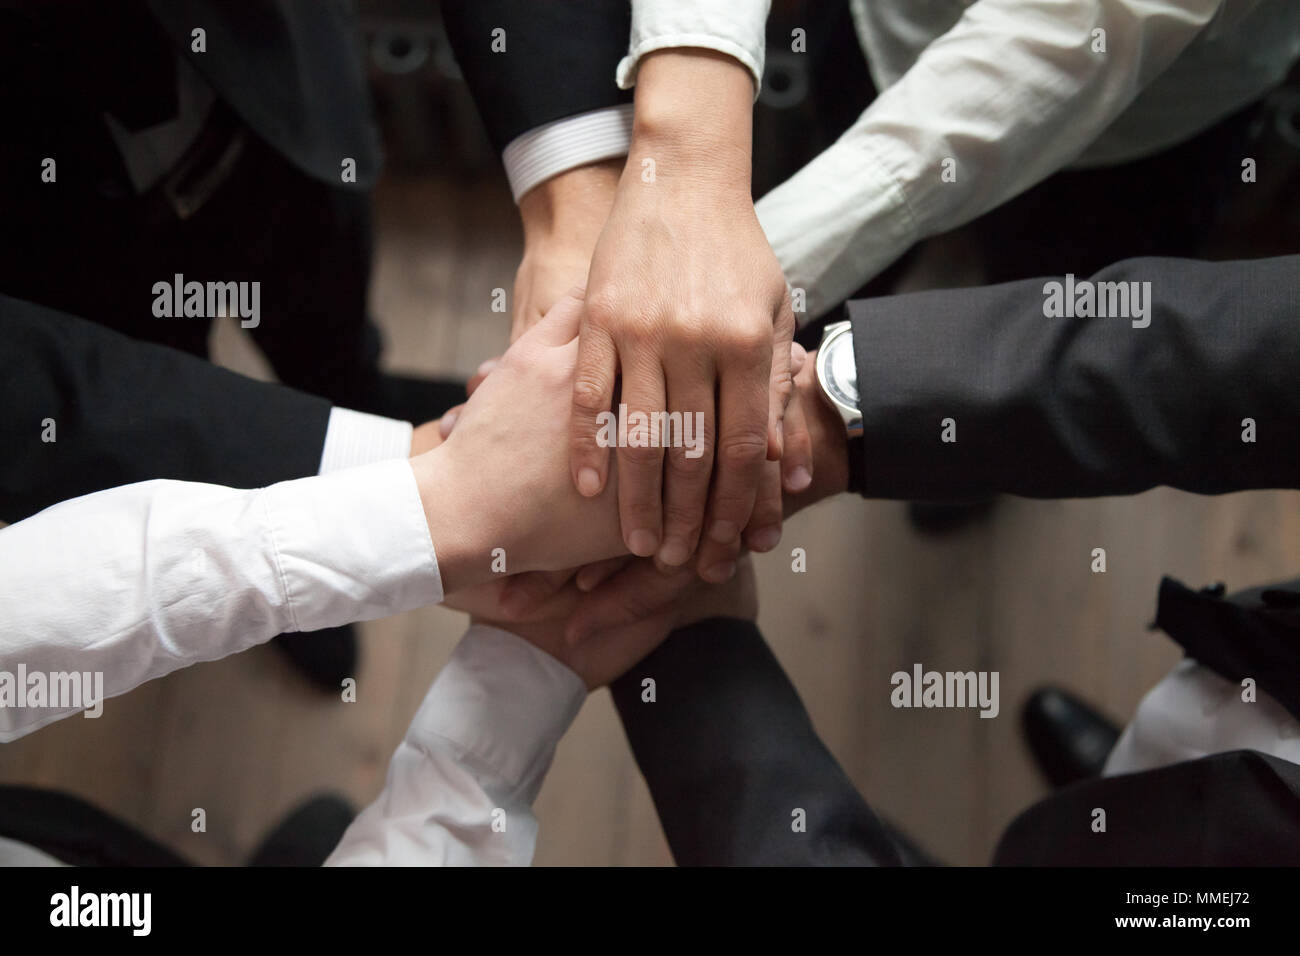 Motivated business people put hands together, trust and support  Stock Photo